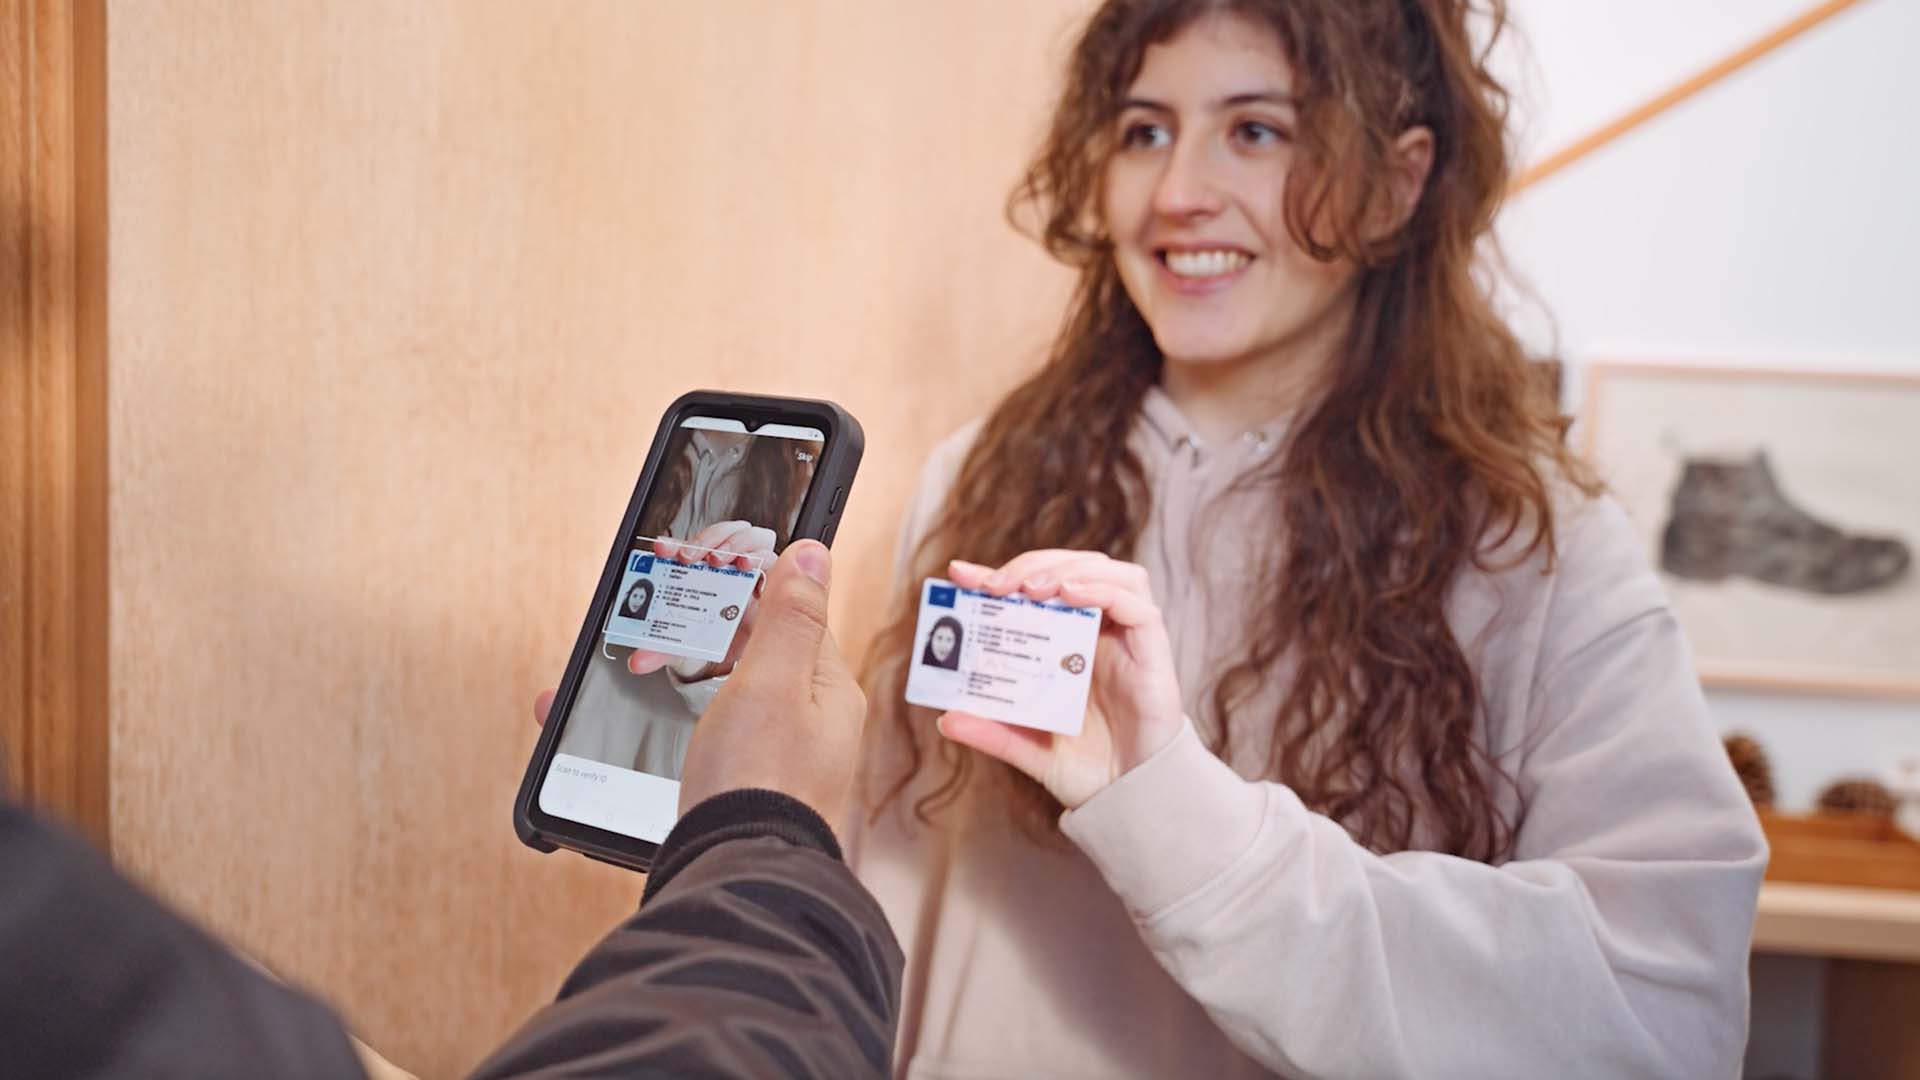 Delivery driver verifying the ID of the recipient using ID verification scanning on smartphone